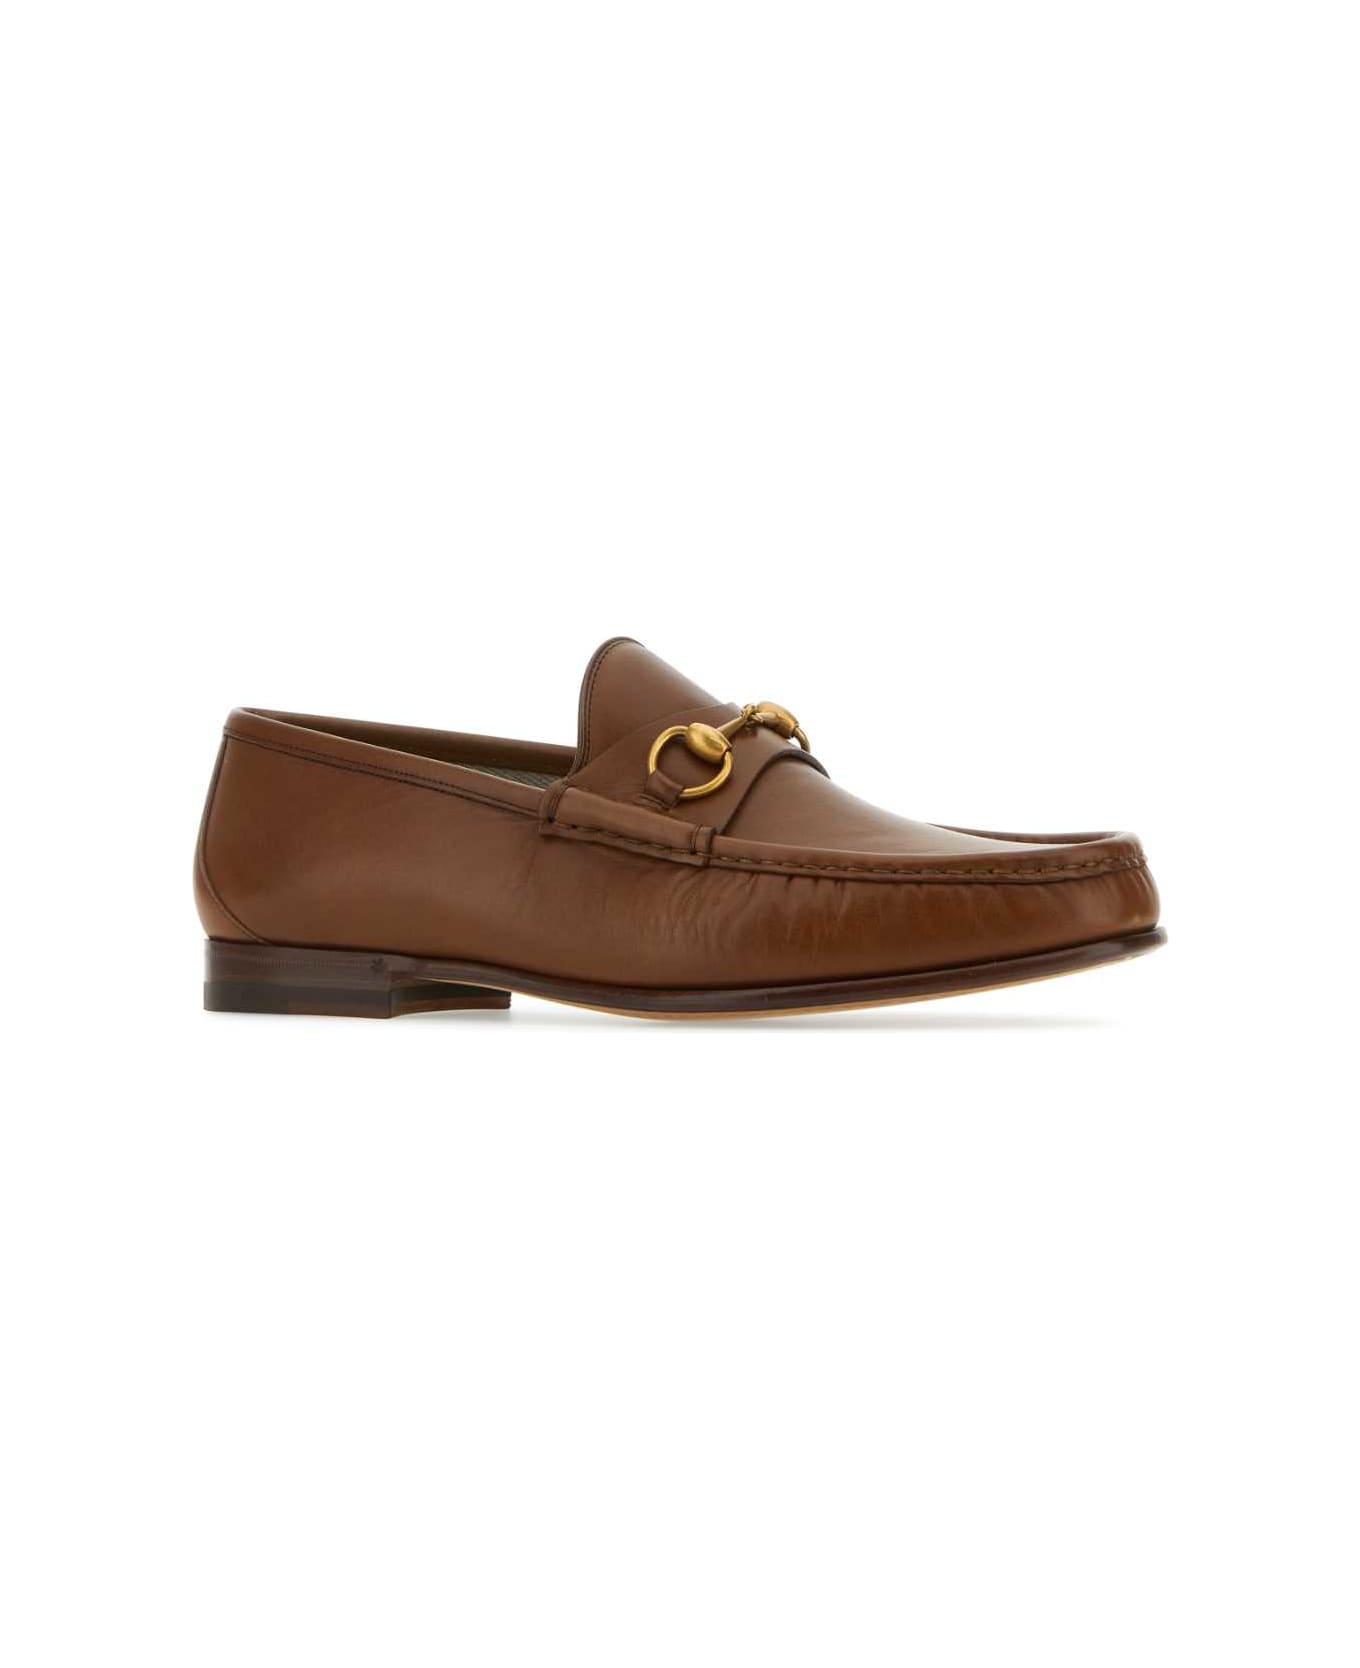 Gucci Brown Leather Loafers - Brown